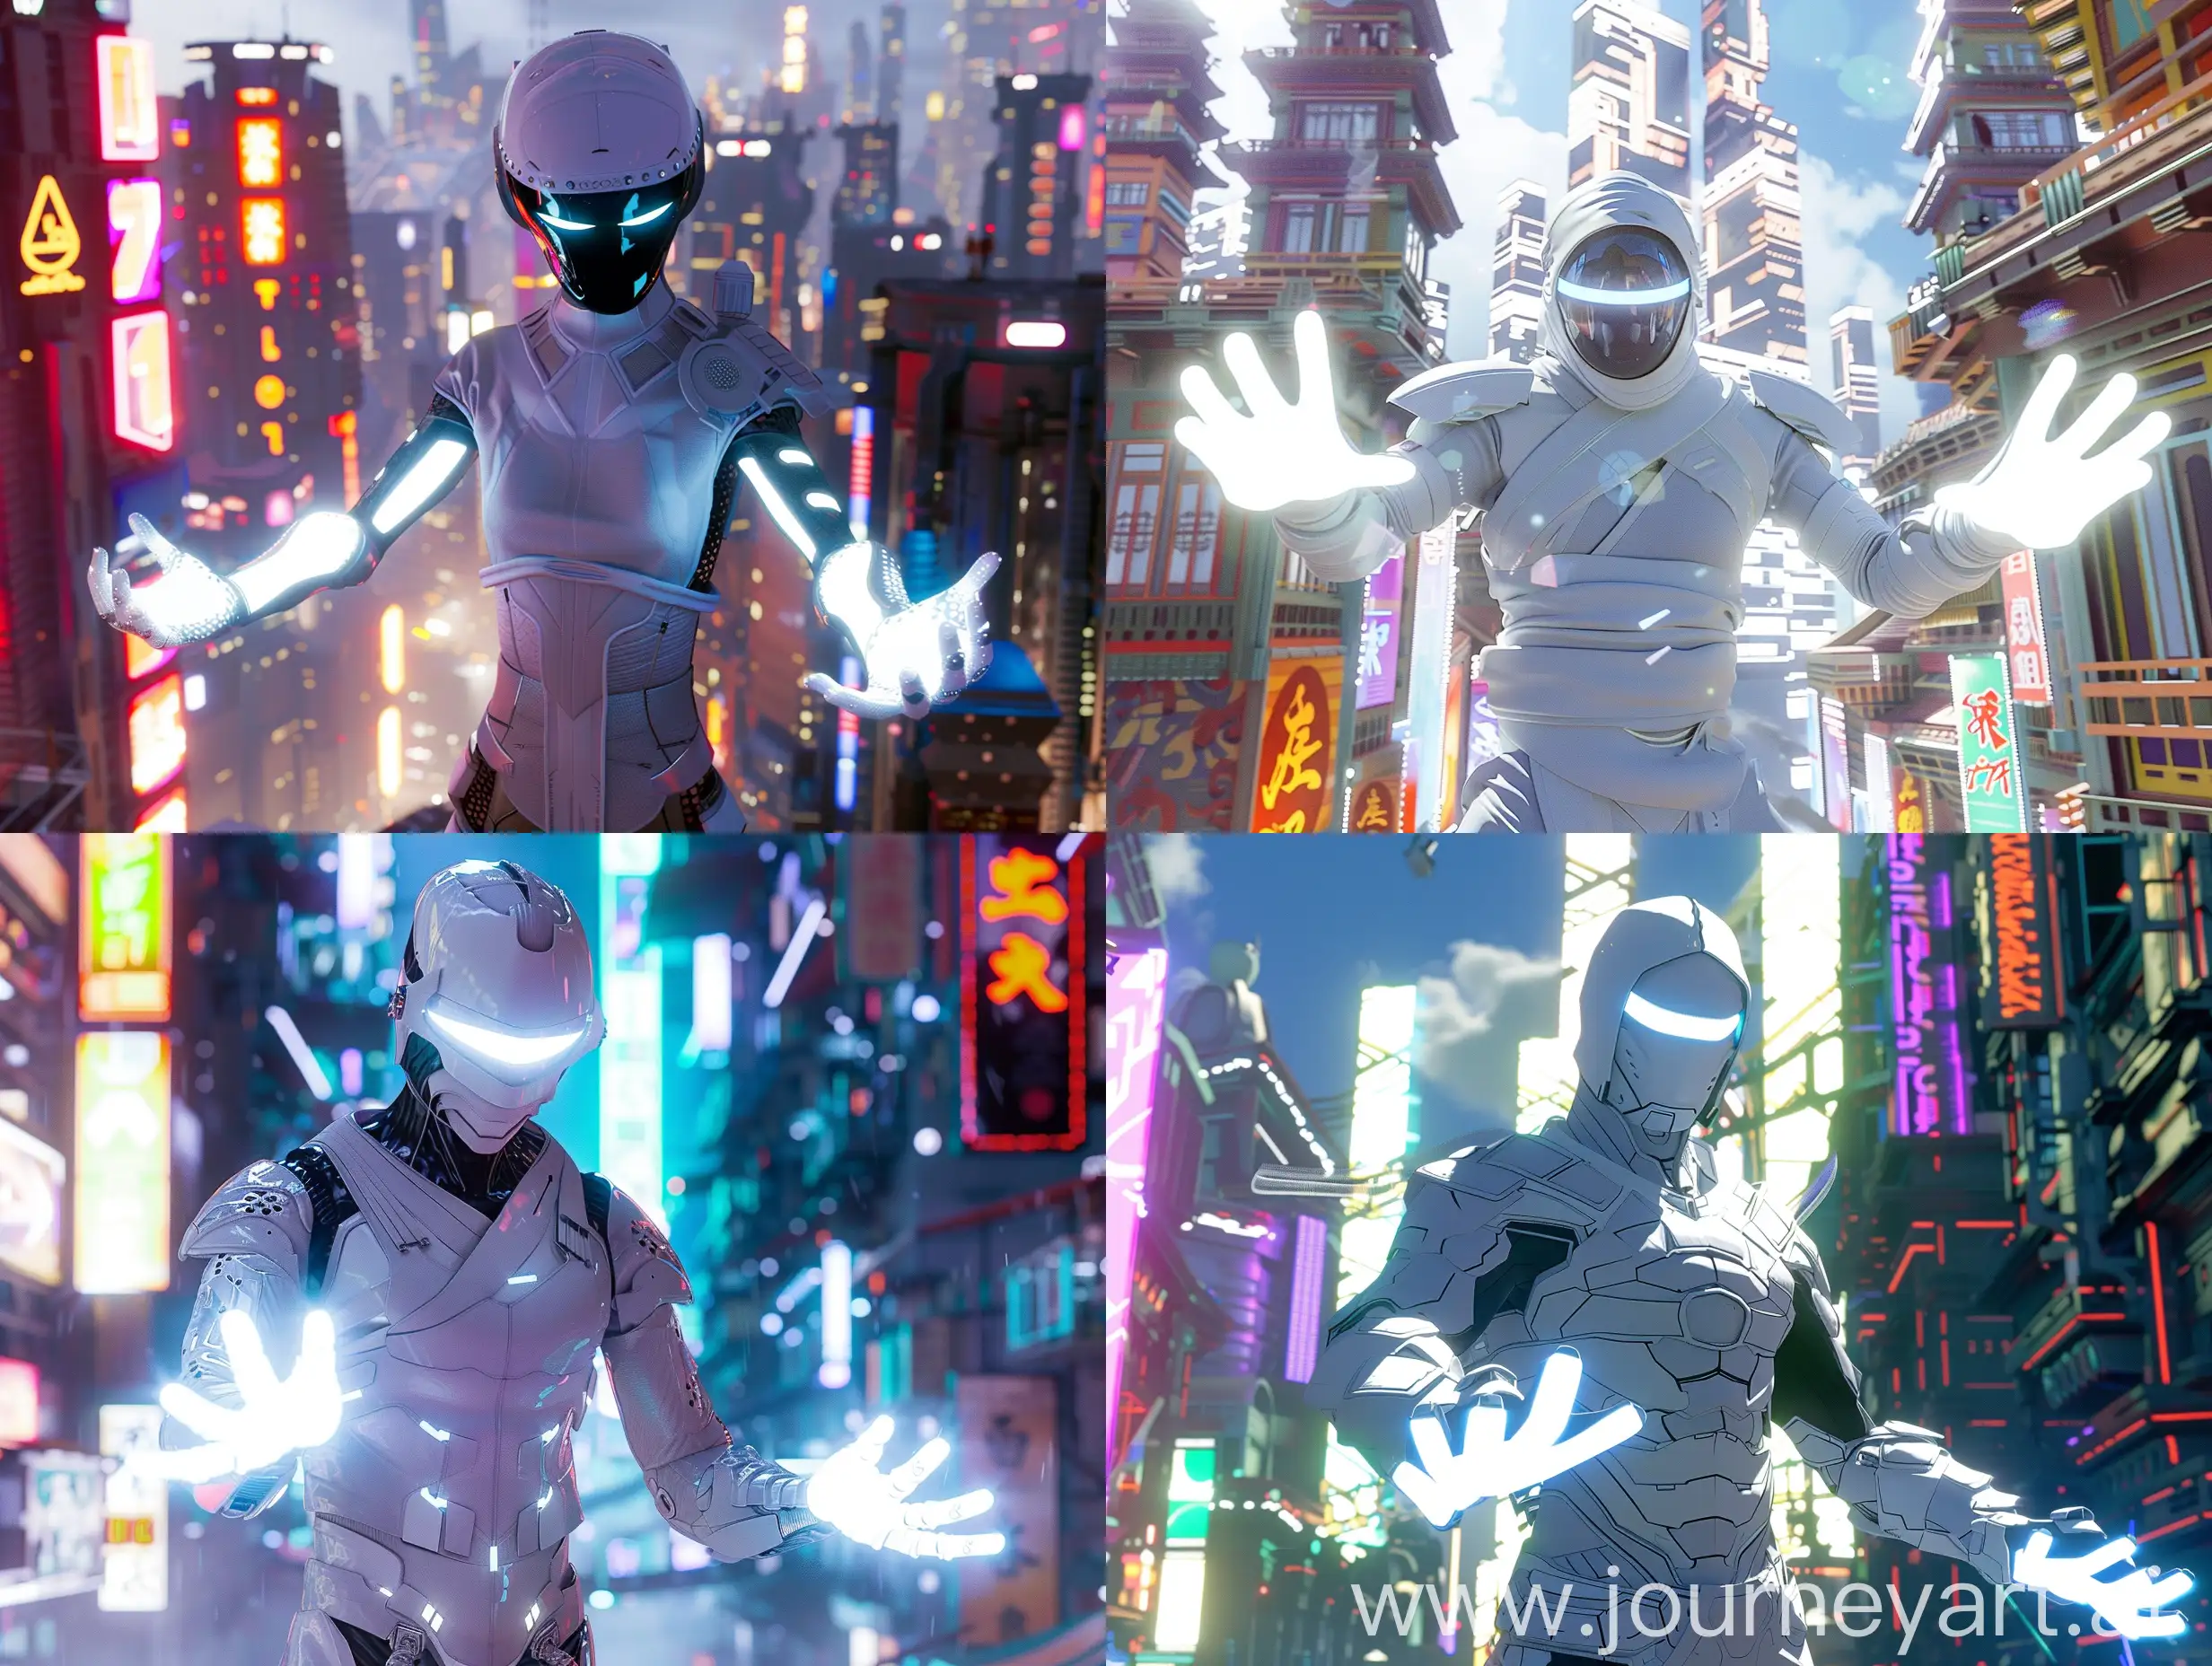 city with futuristic colours and a ninja robot with white costume and white light on hands